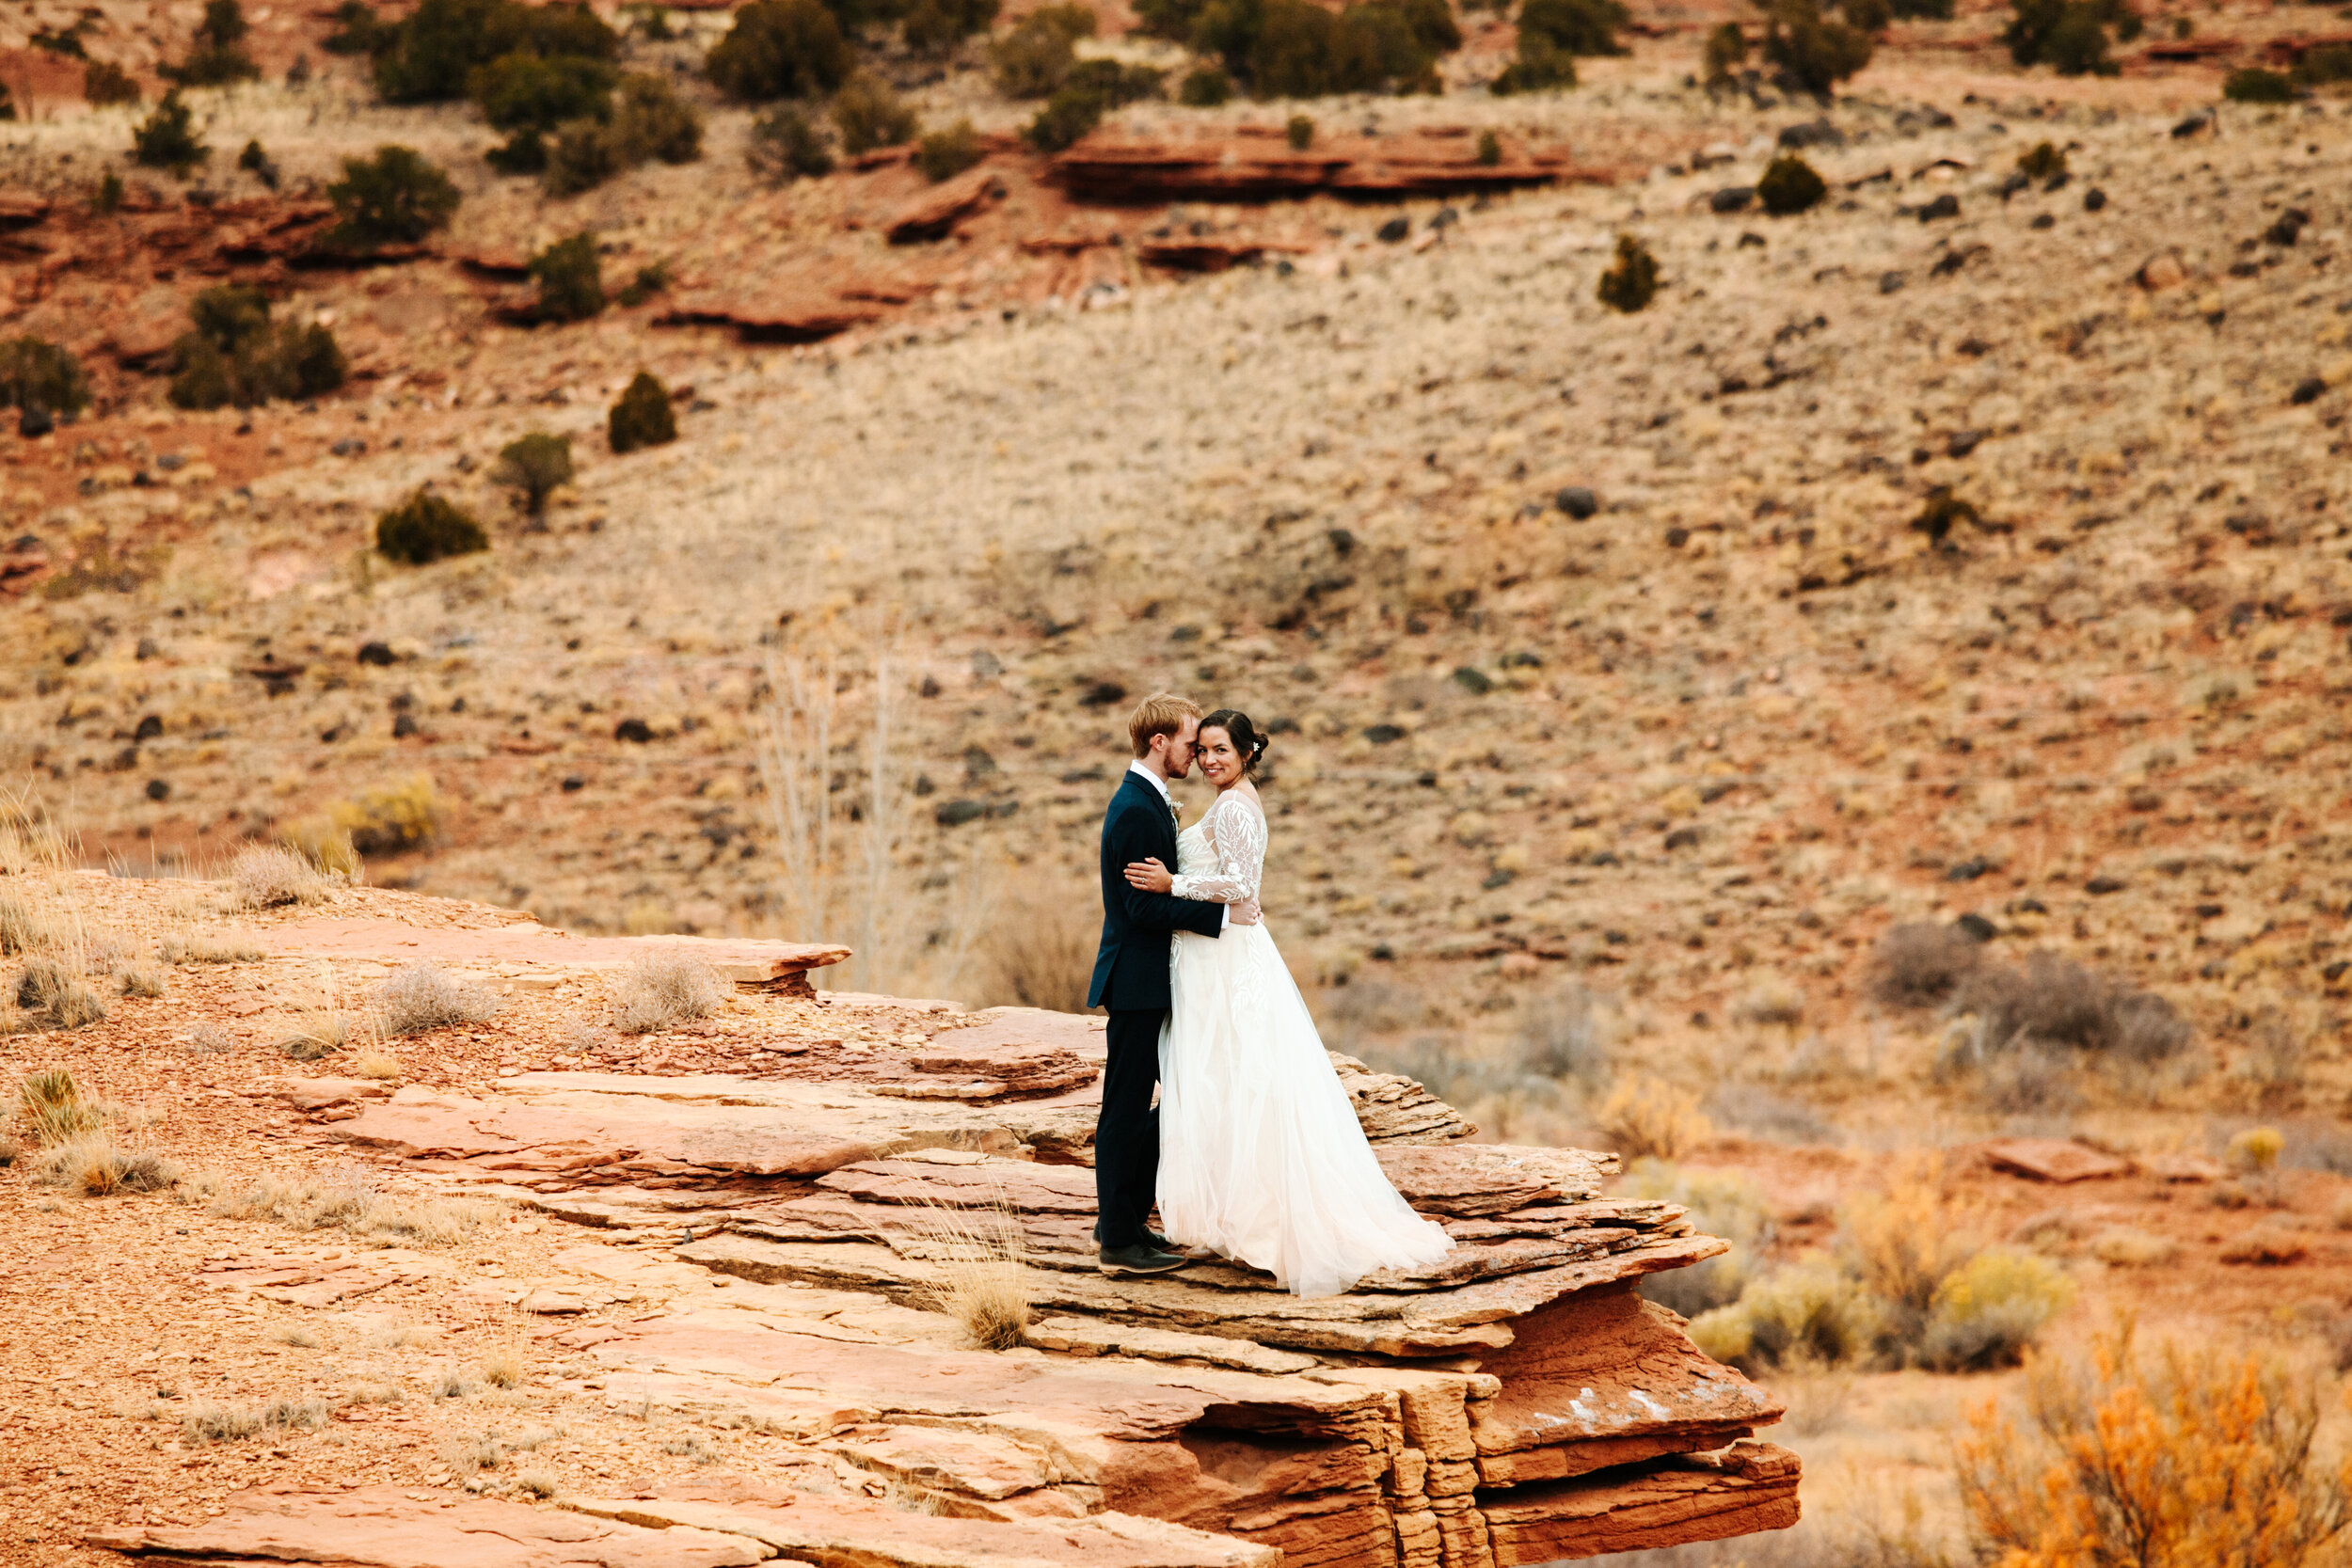 Couple at their fall wedding in Moab, Utah.